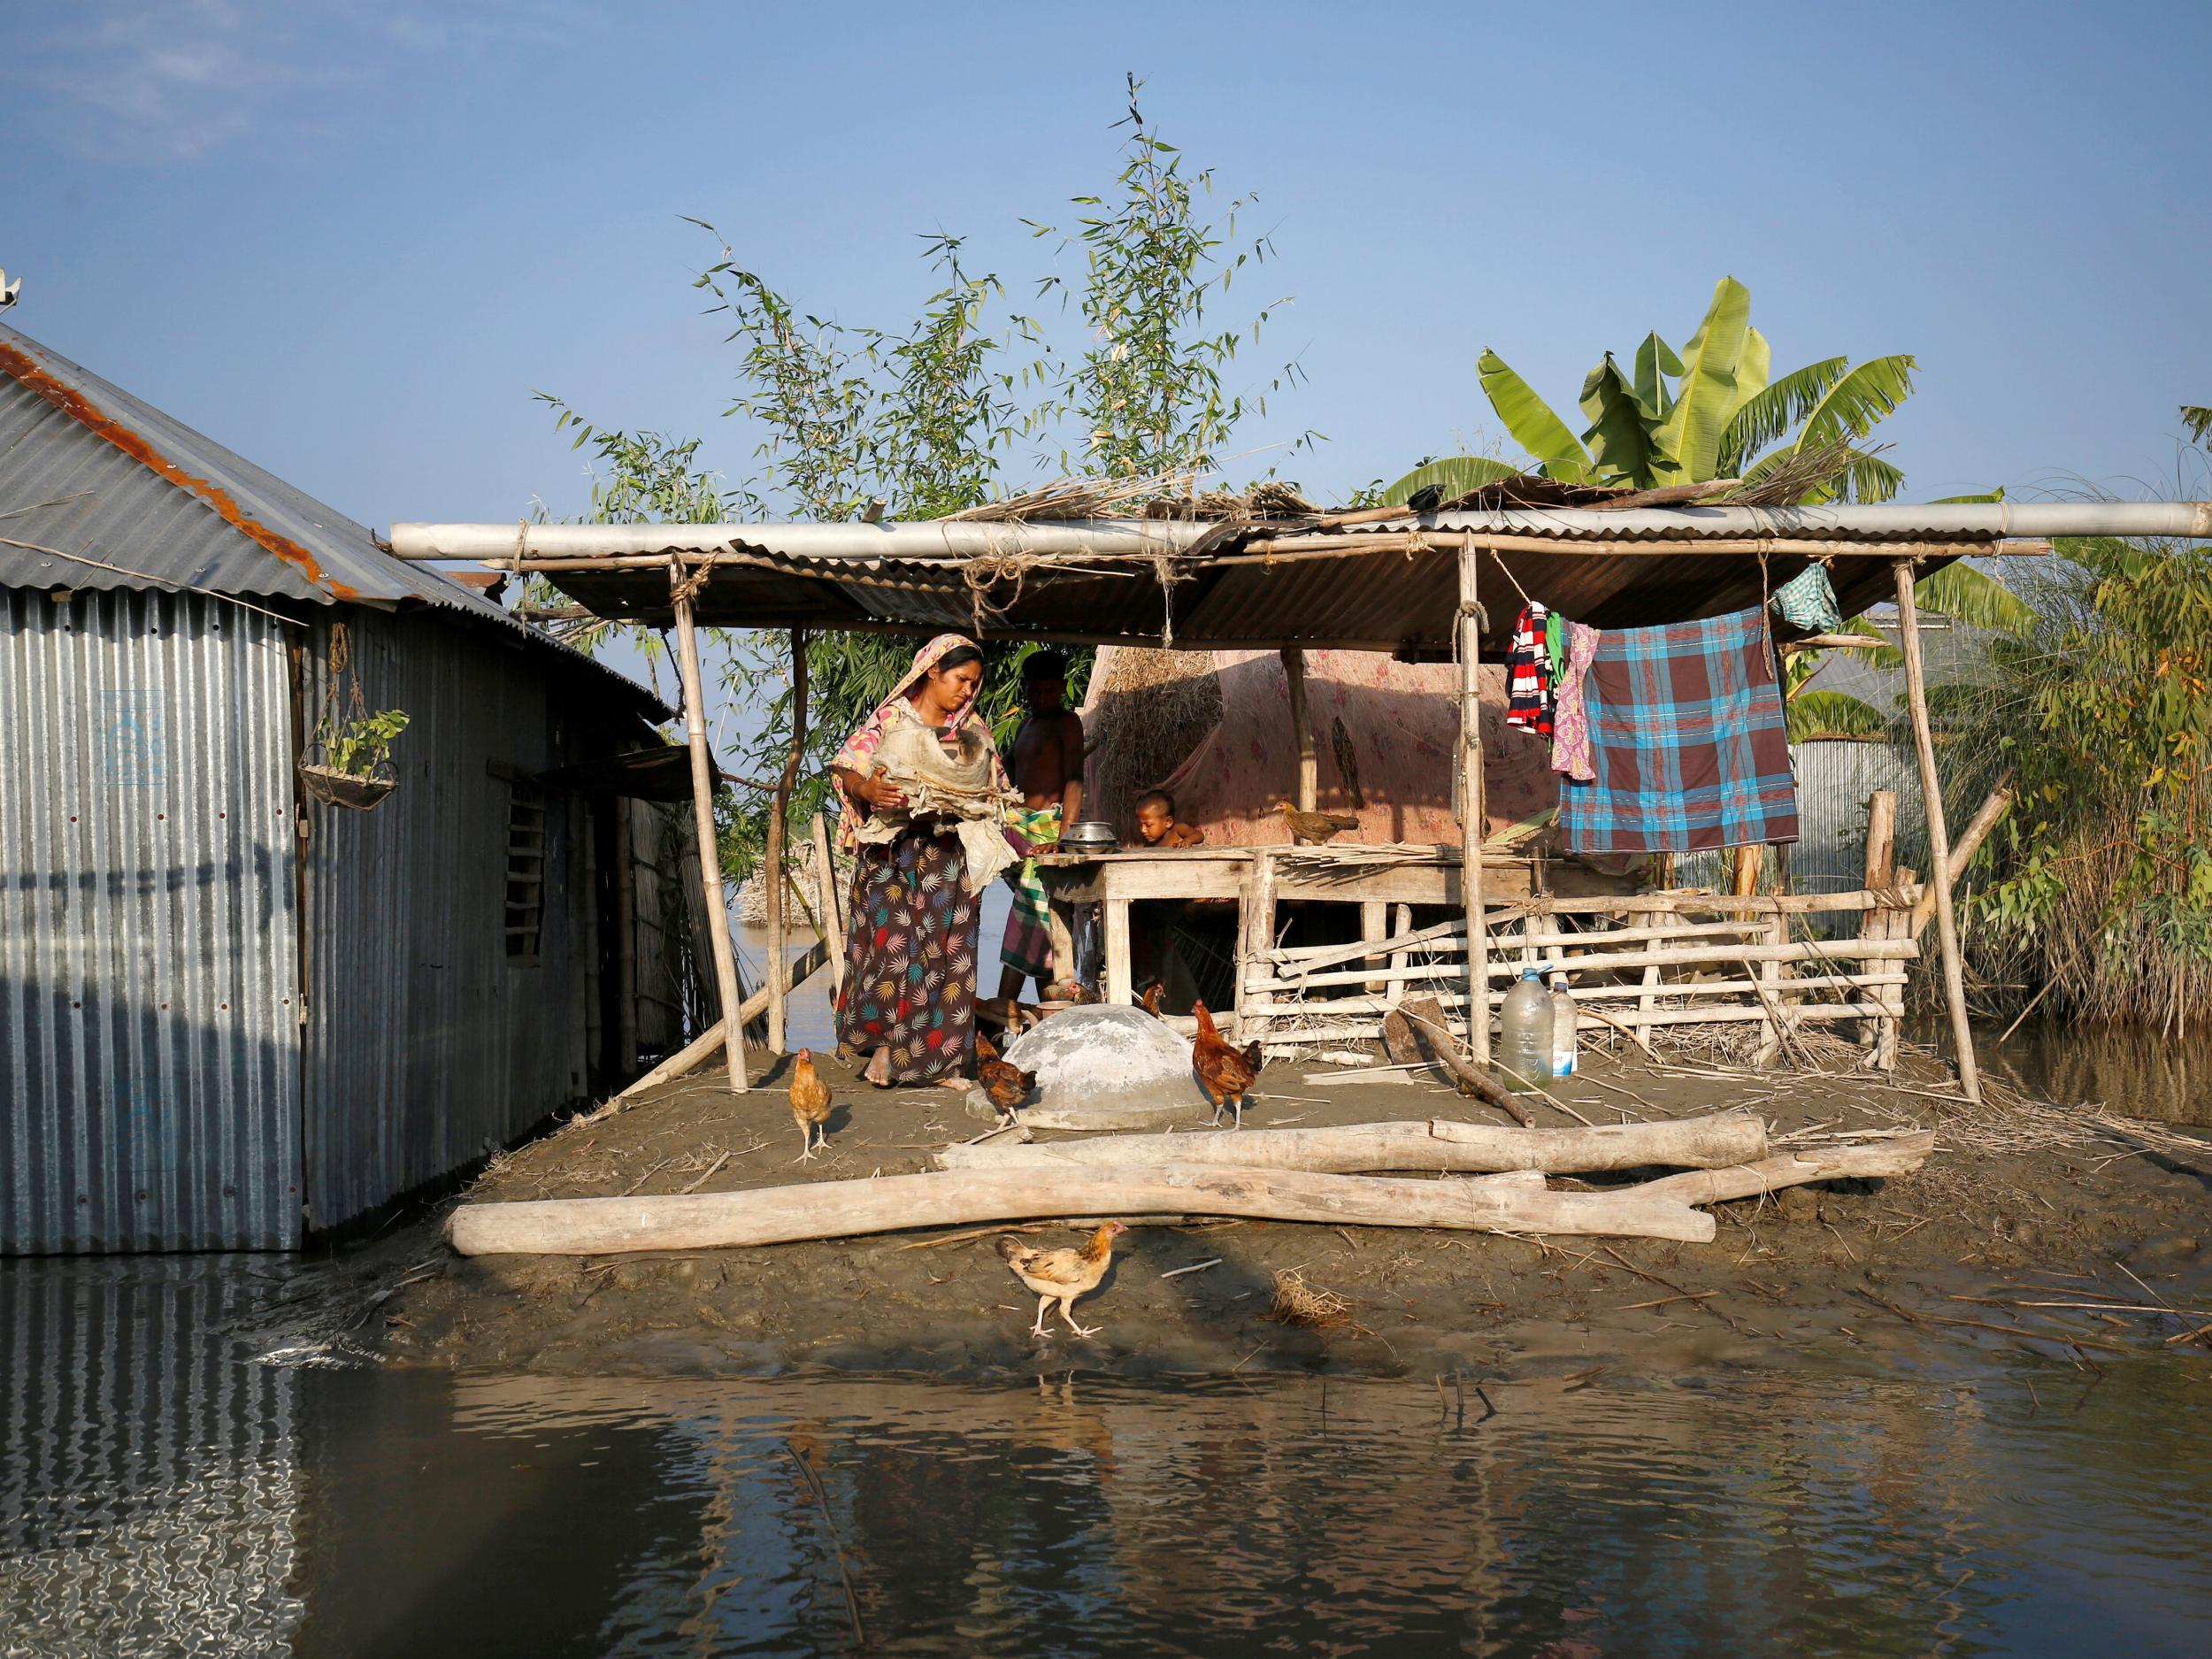 Around 13,000 people are ill with diarrhoea and respiratory infections in Bangladesh following the floods